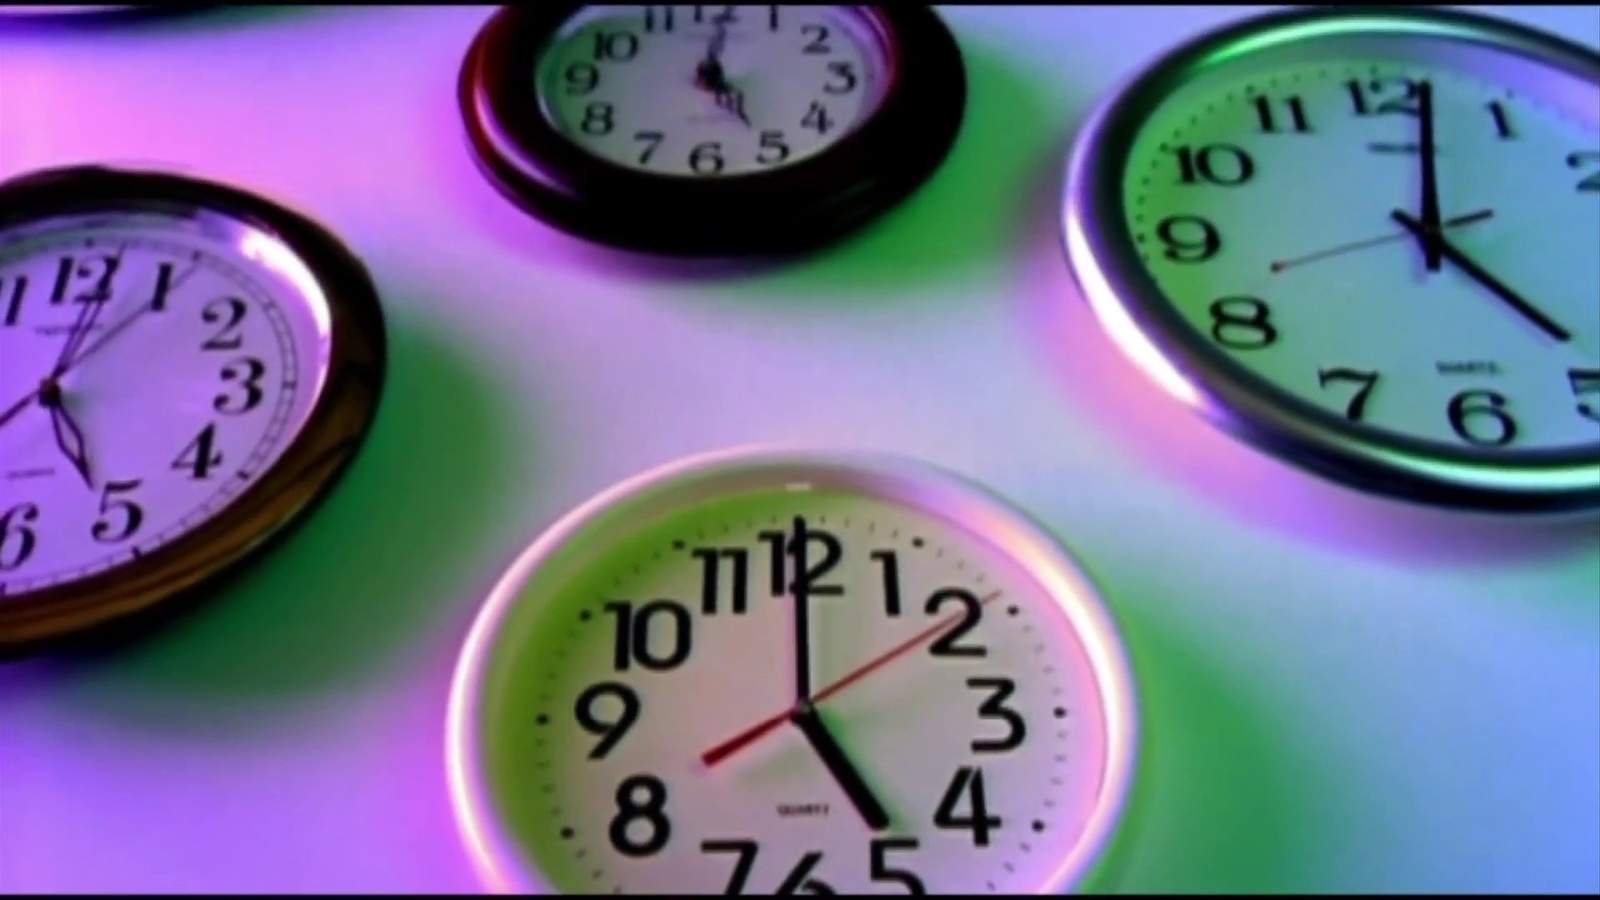 Should daylight saving be extended year-round? It could affect your health